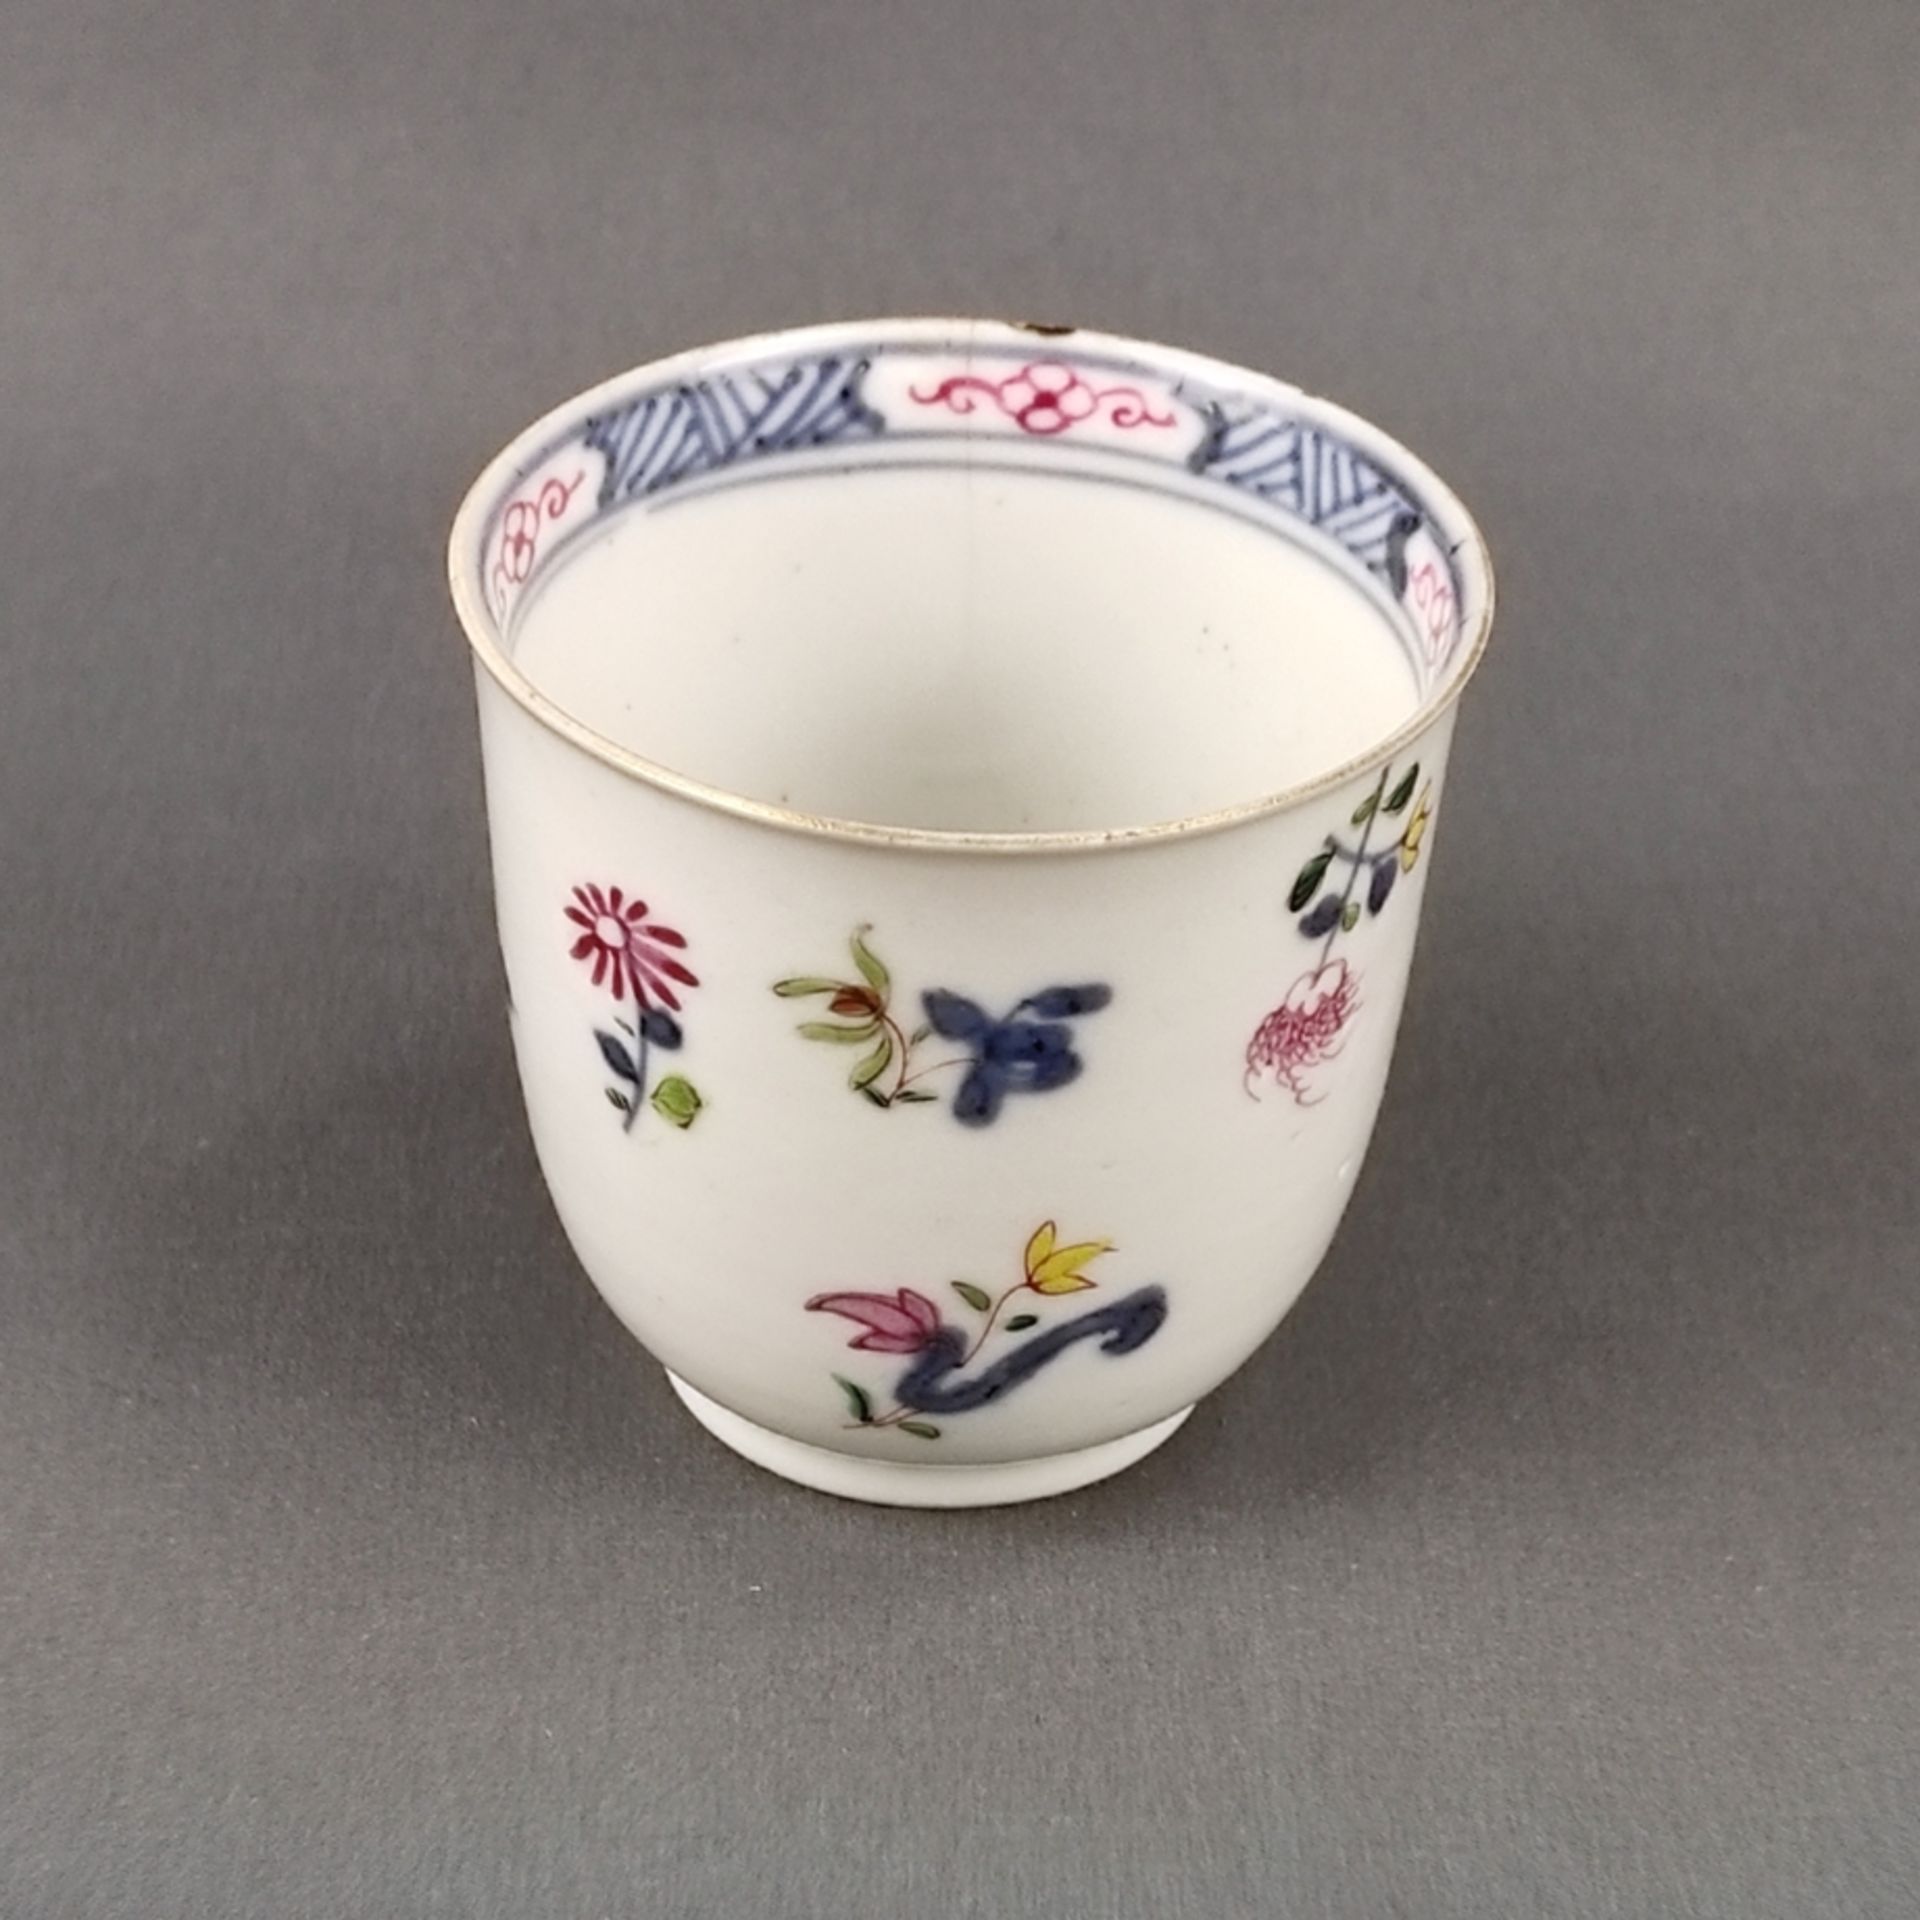 Cup, famille rose, China circa 1900, porcelain cup with polychrome floral decoration, gilding resid - Image 2 of 4